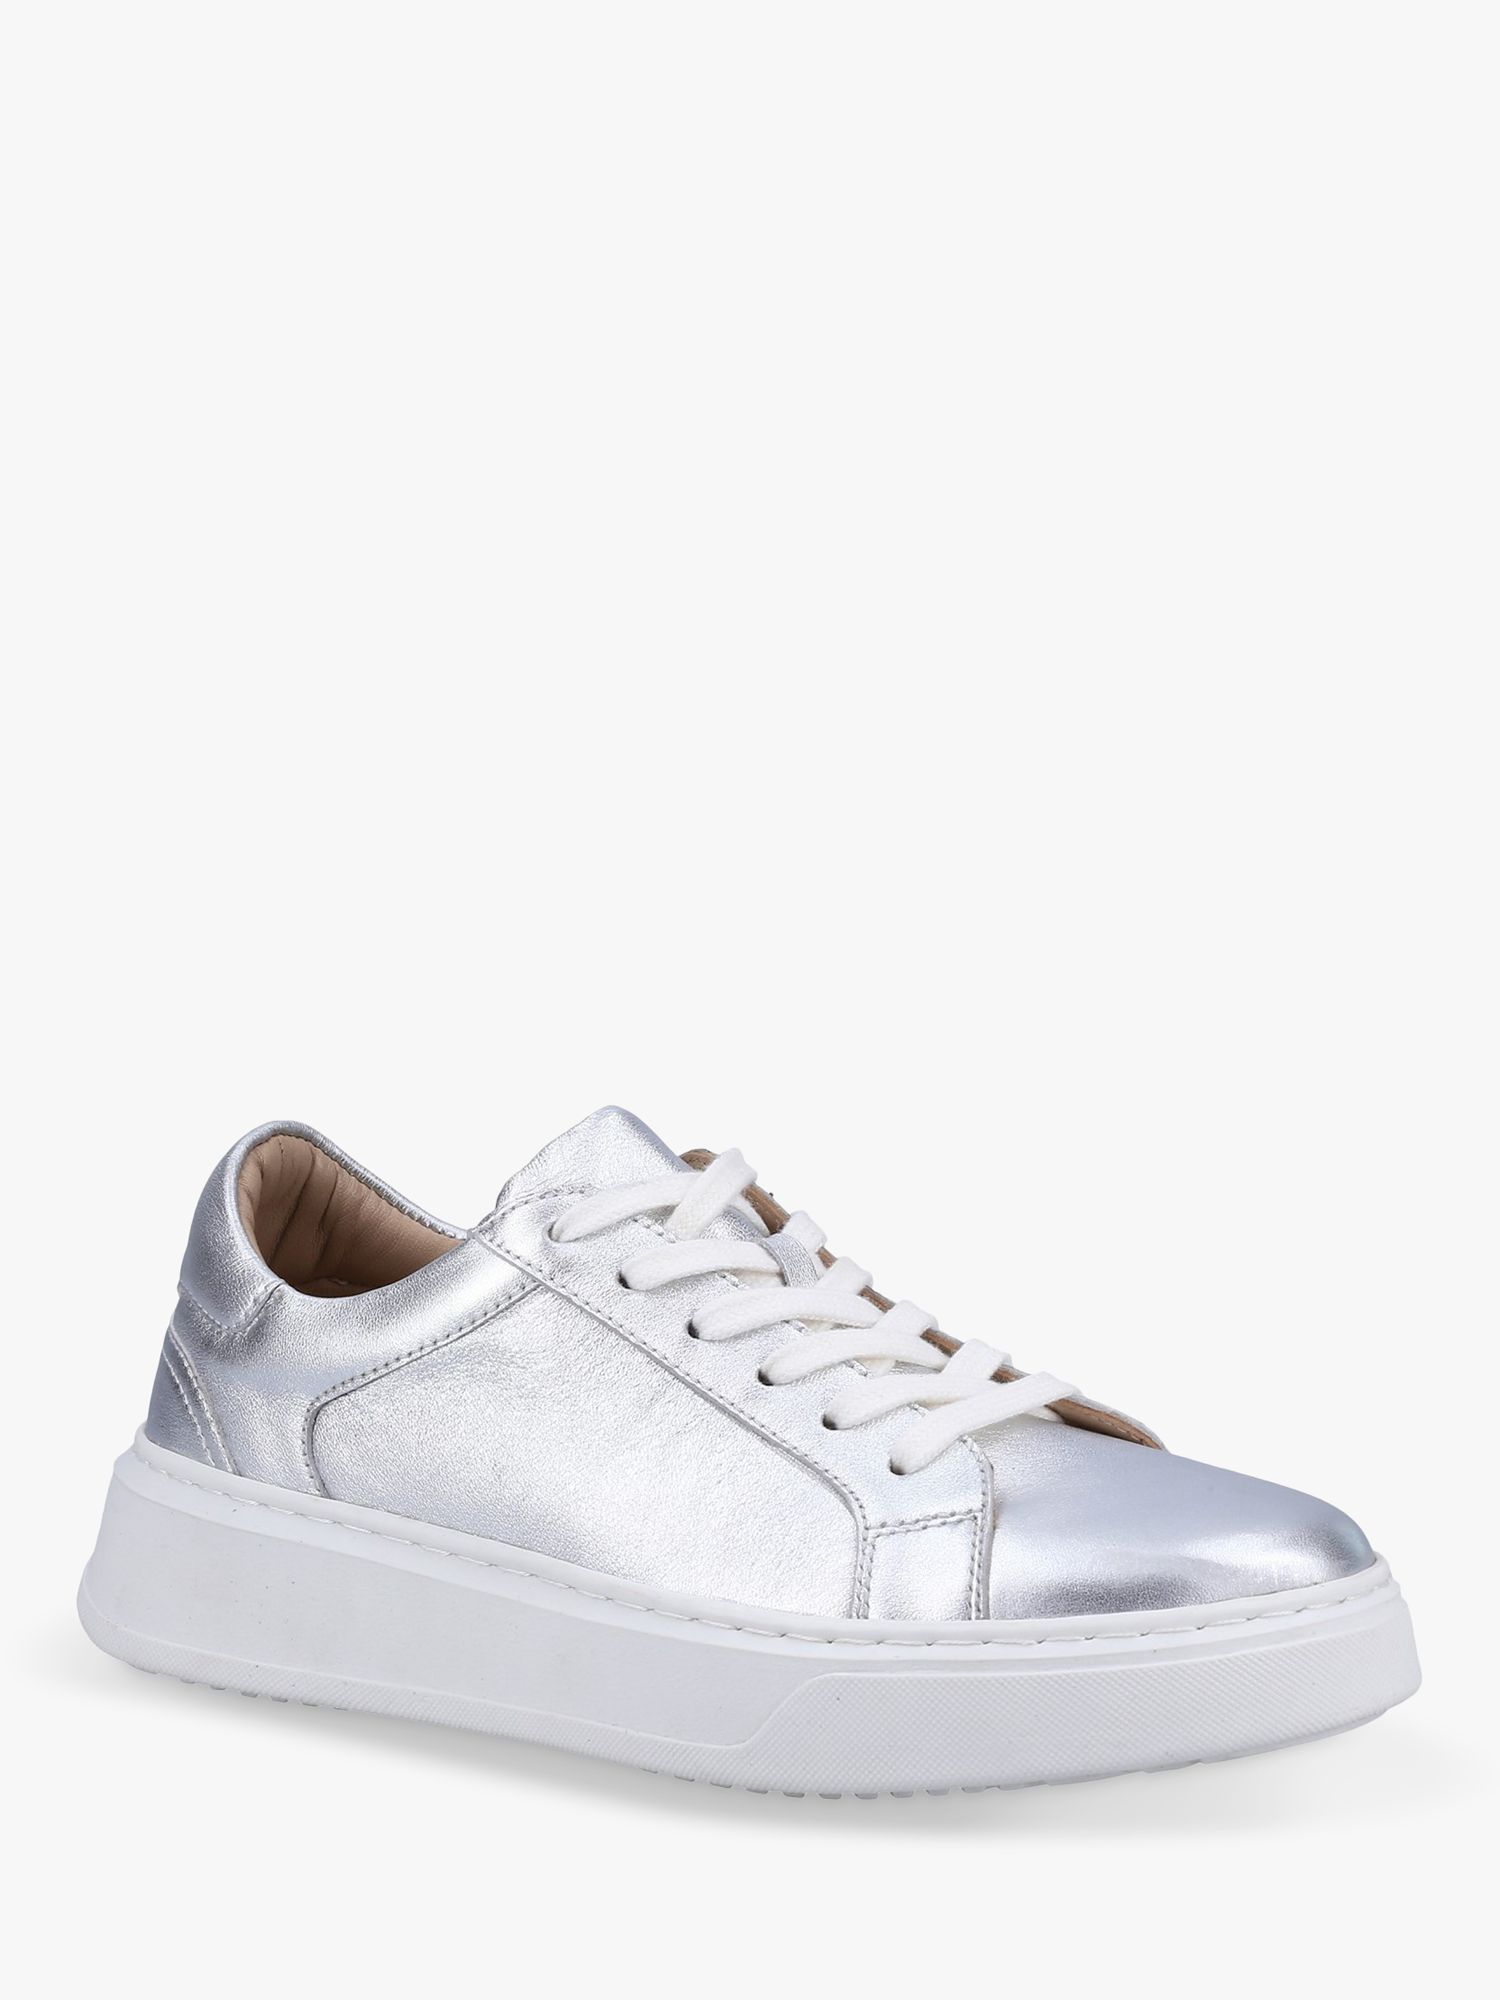 Hush Puppies Camille Lace-Up Leather Trainers, Silver, 3